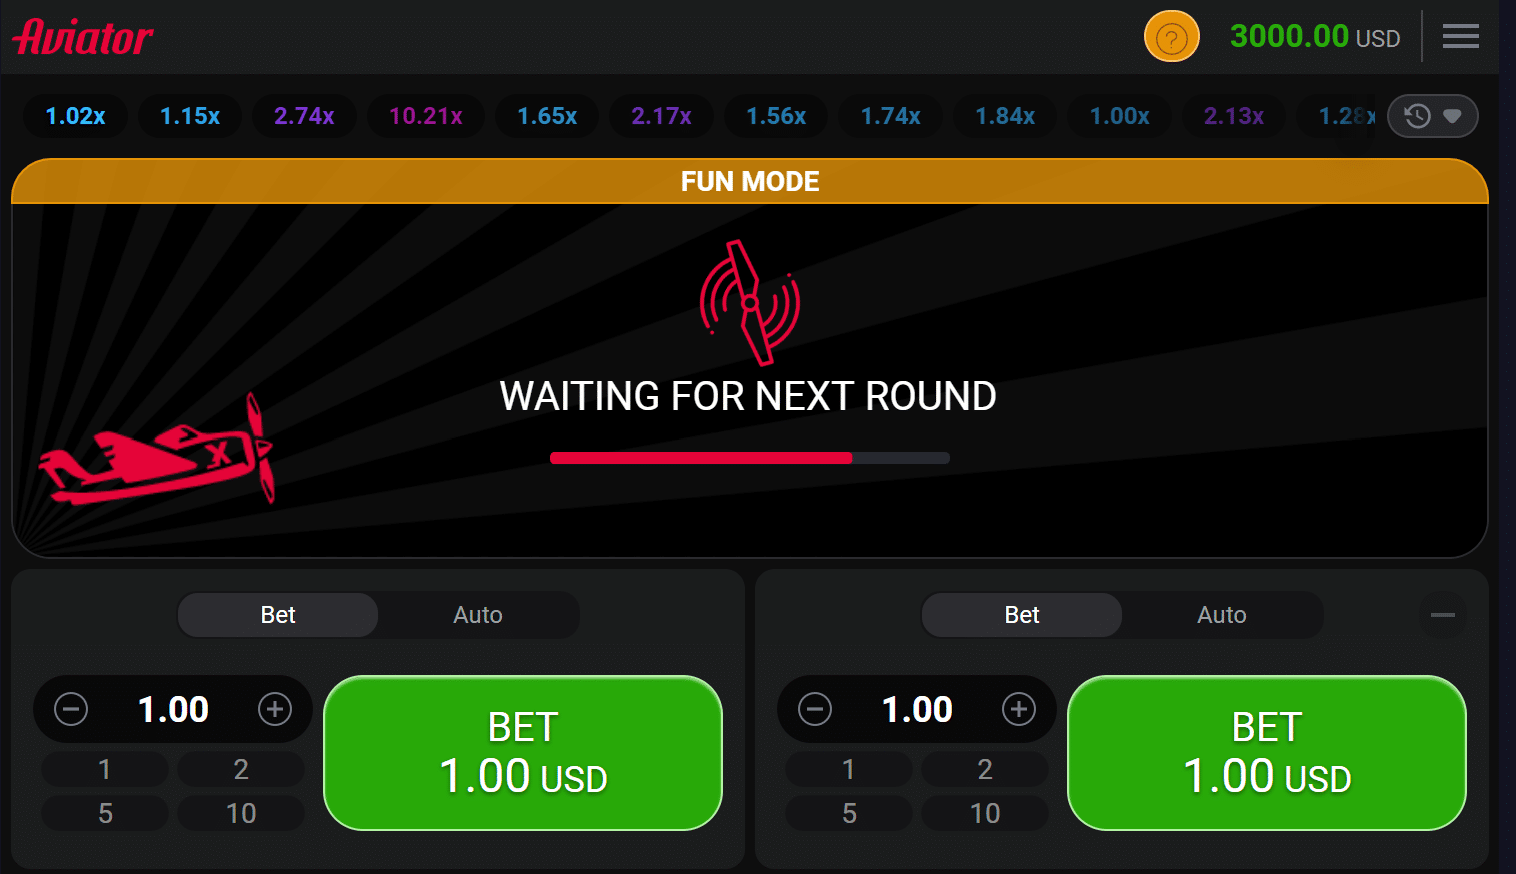 Aviator game in FUN MODE displaying 'WAITING FOR NEXT ROUND' with betting options